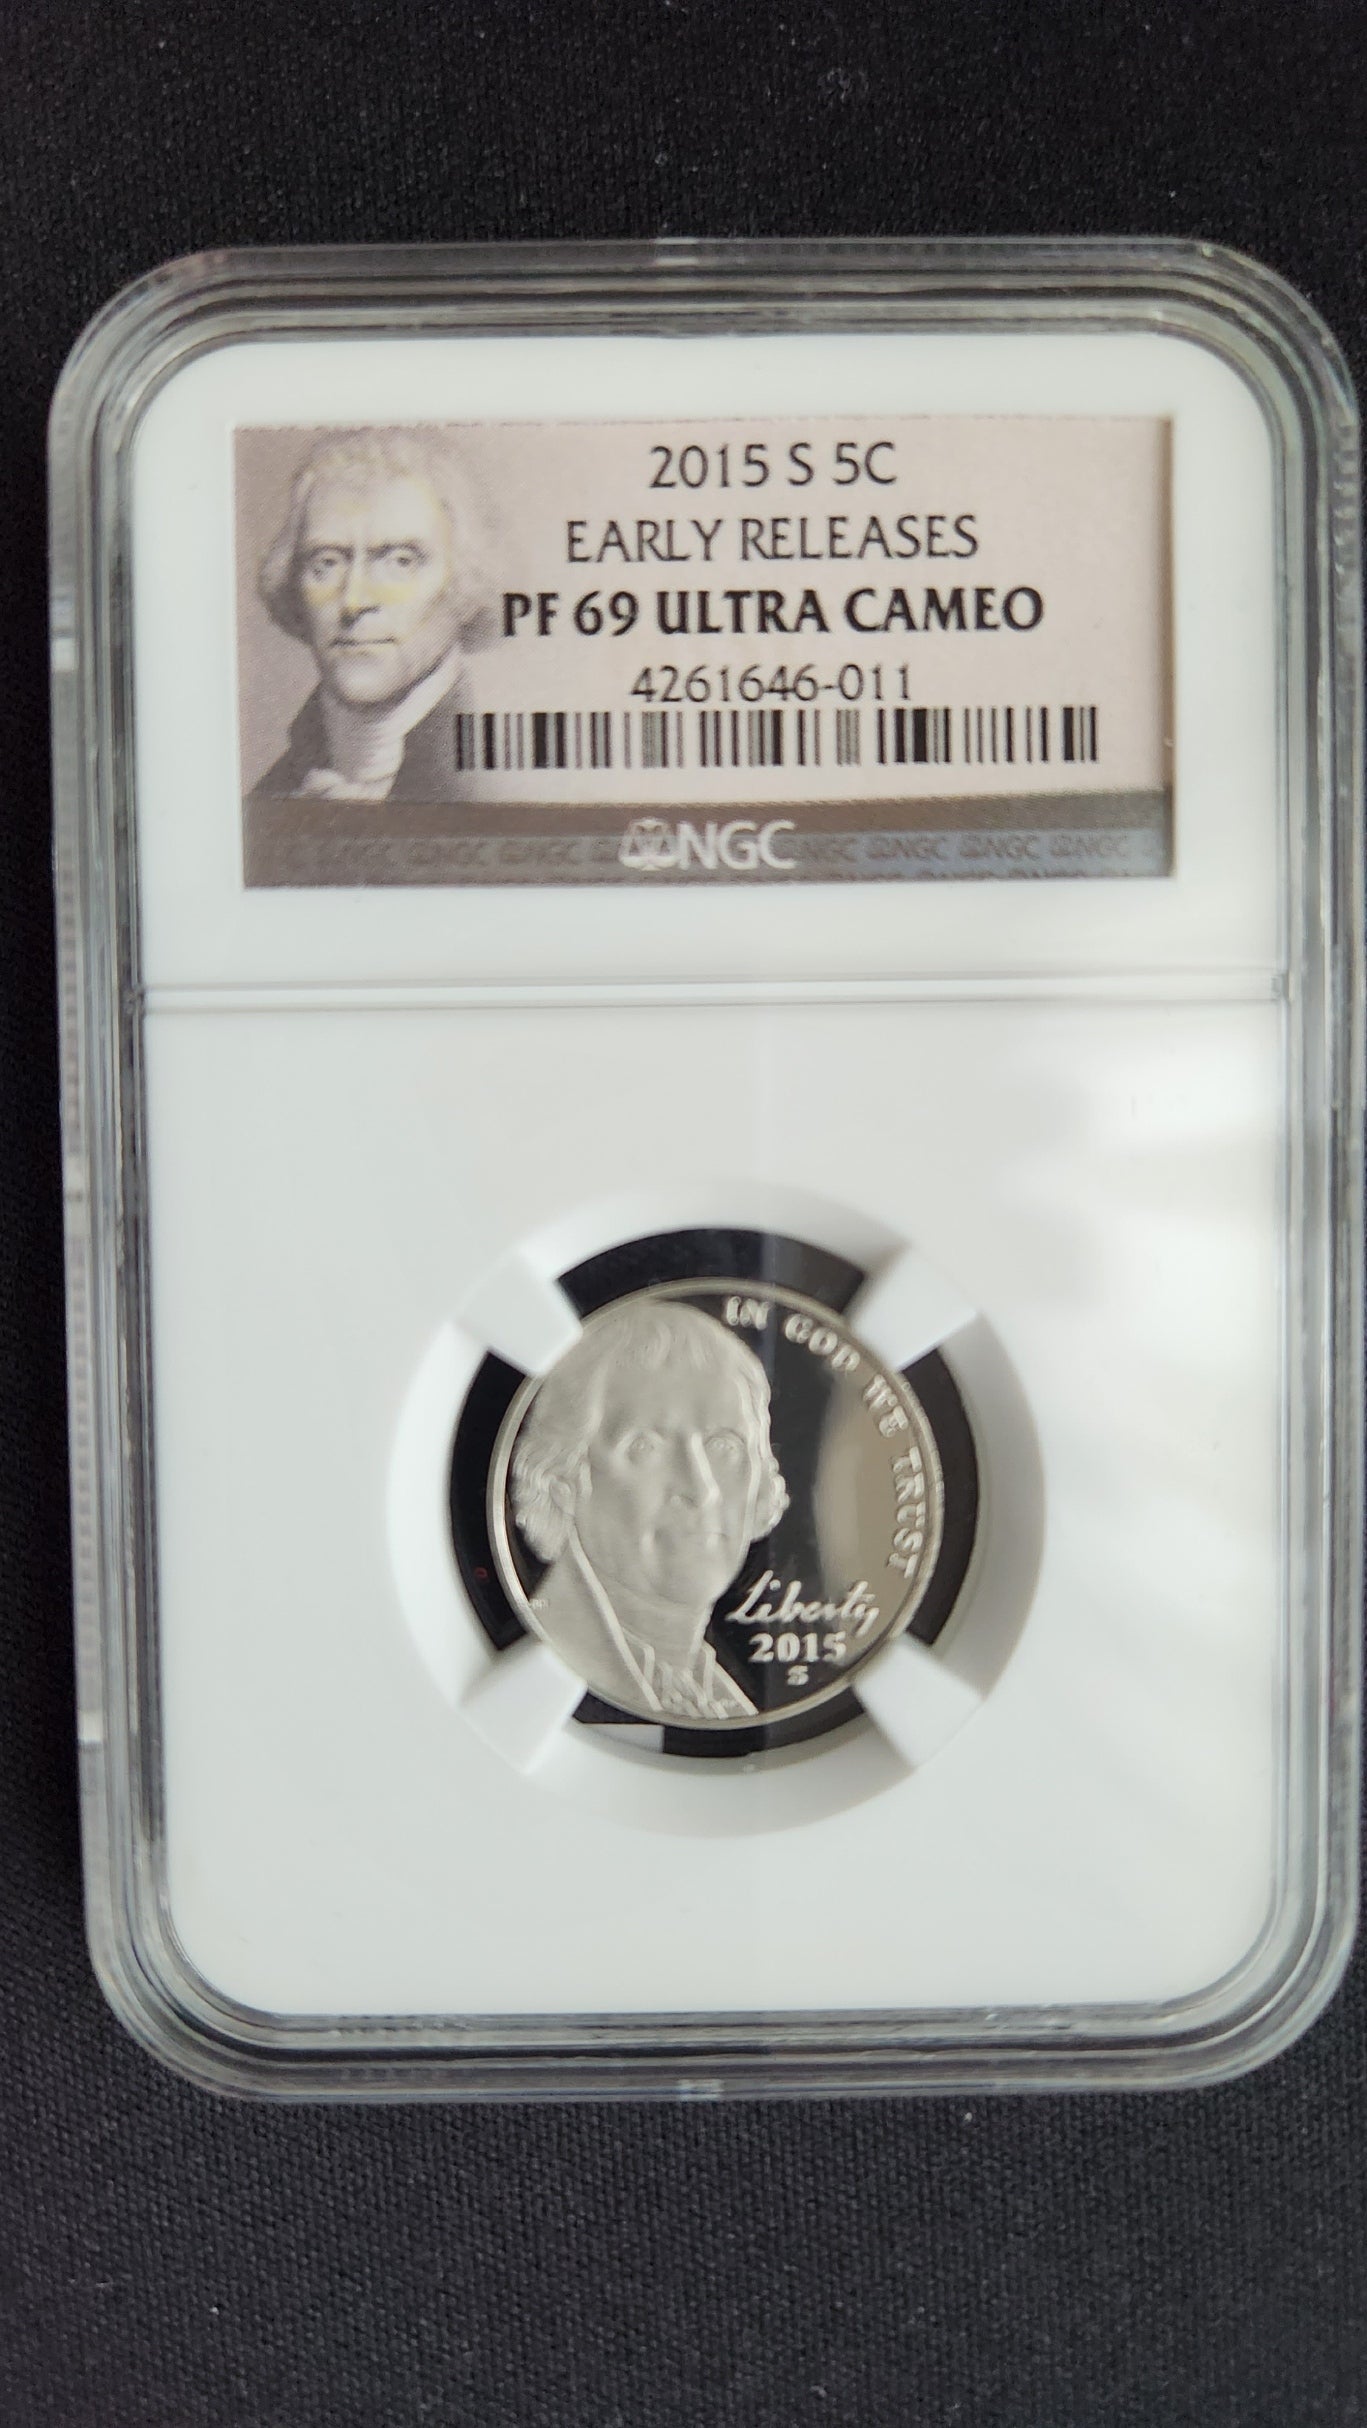 2015-S Early Releases 5C - PF69 Ultra Cameo